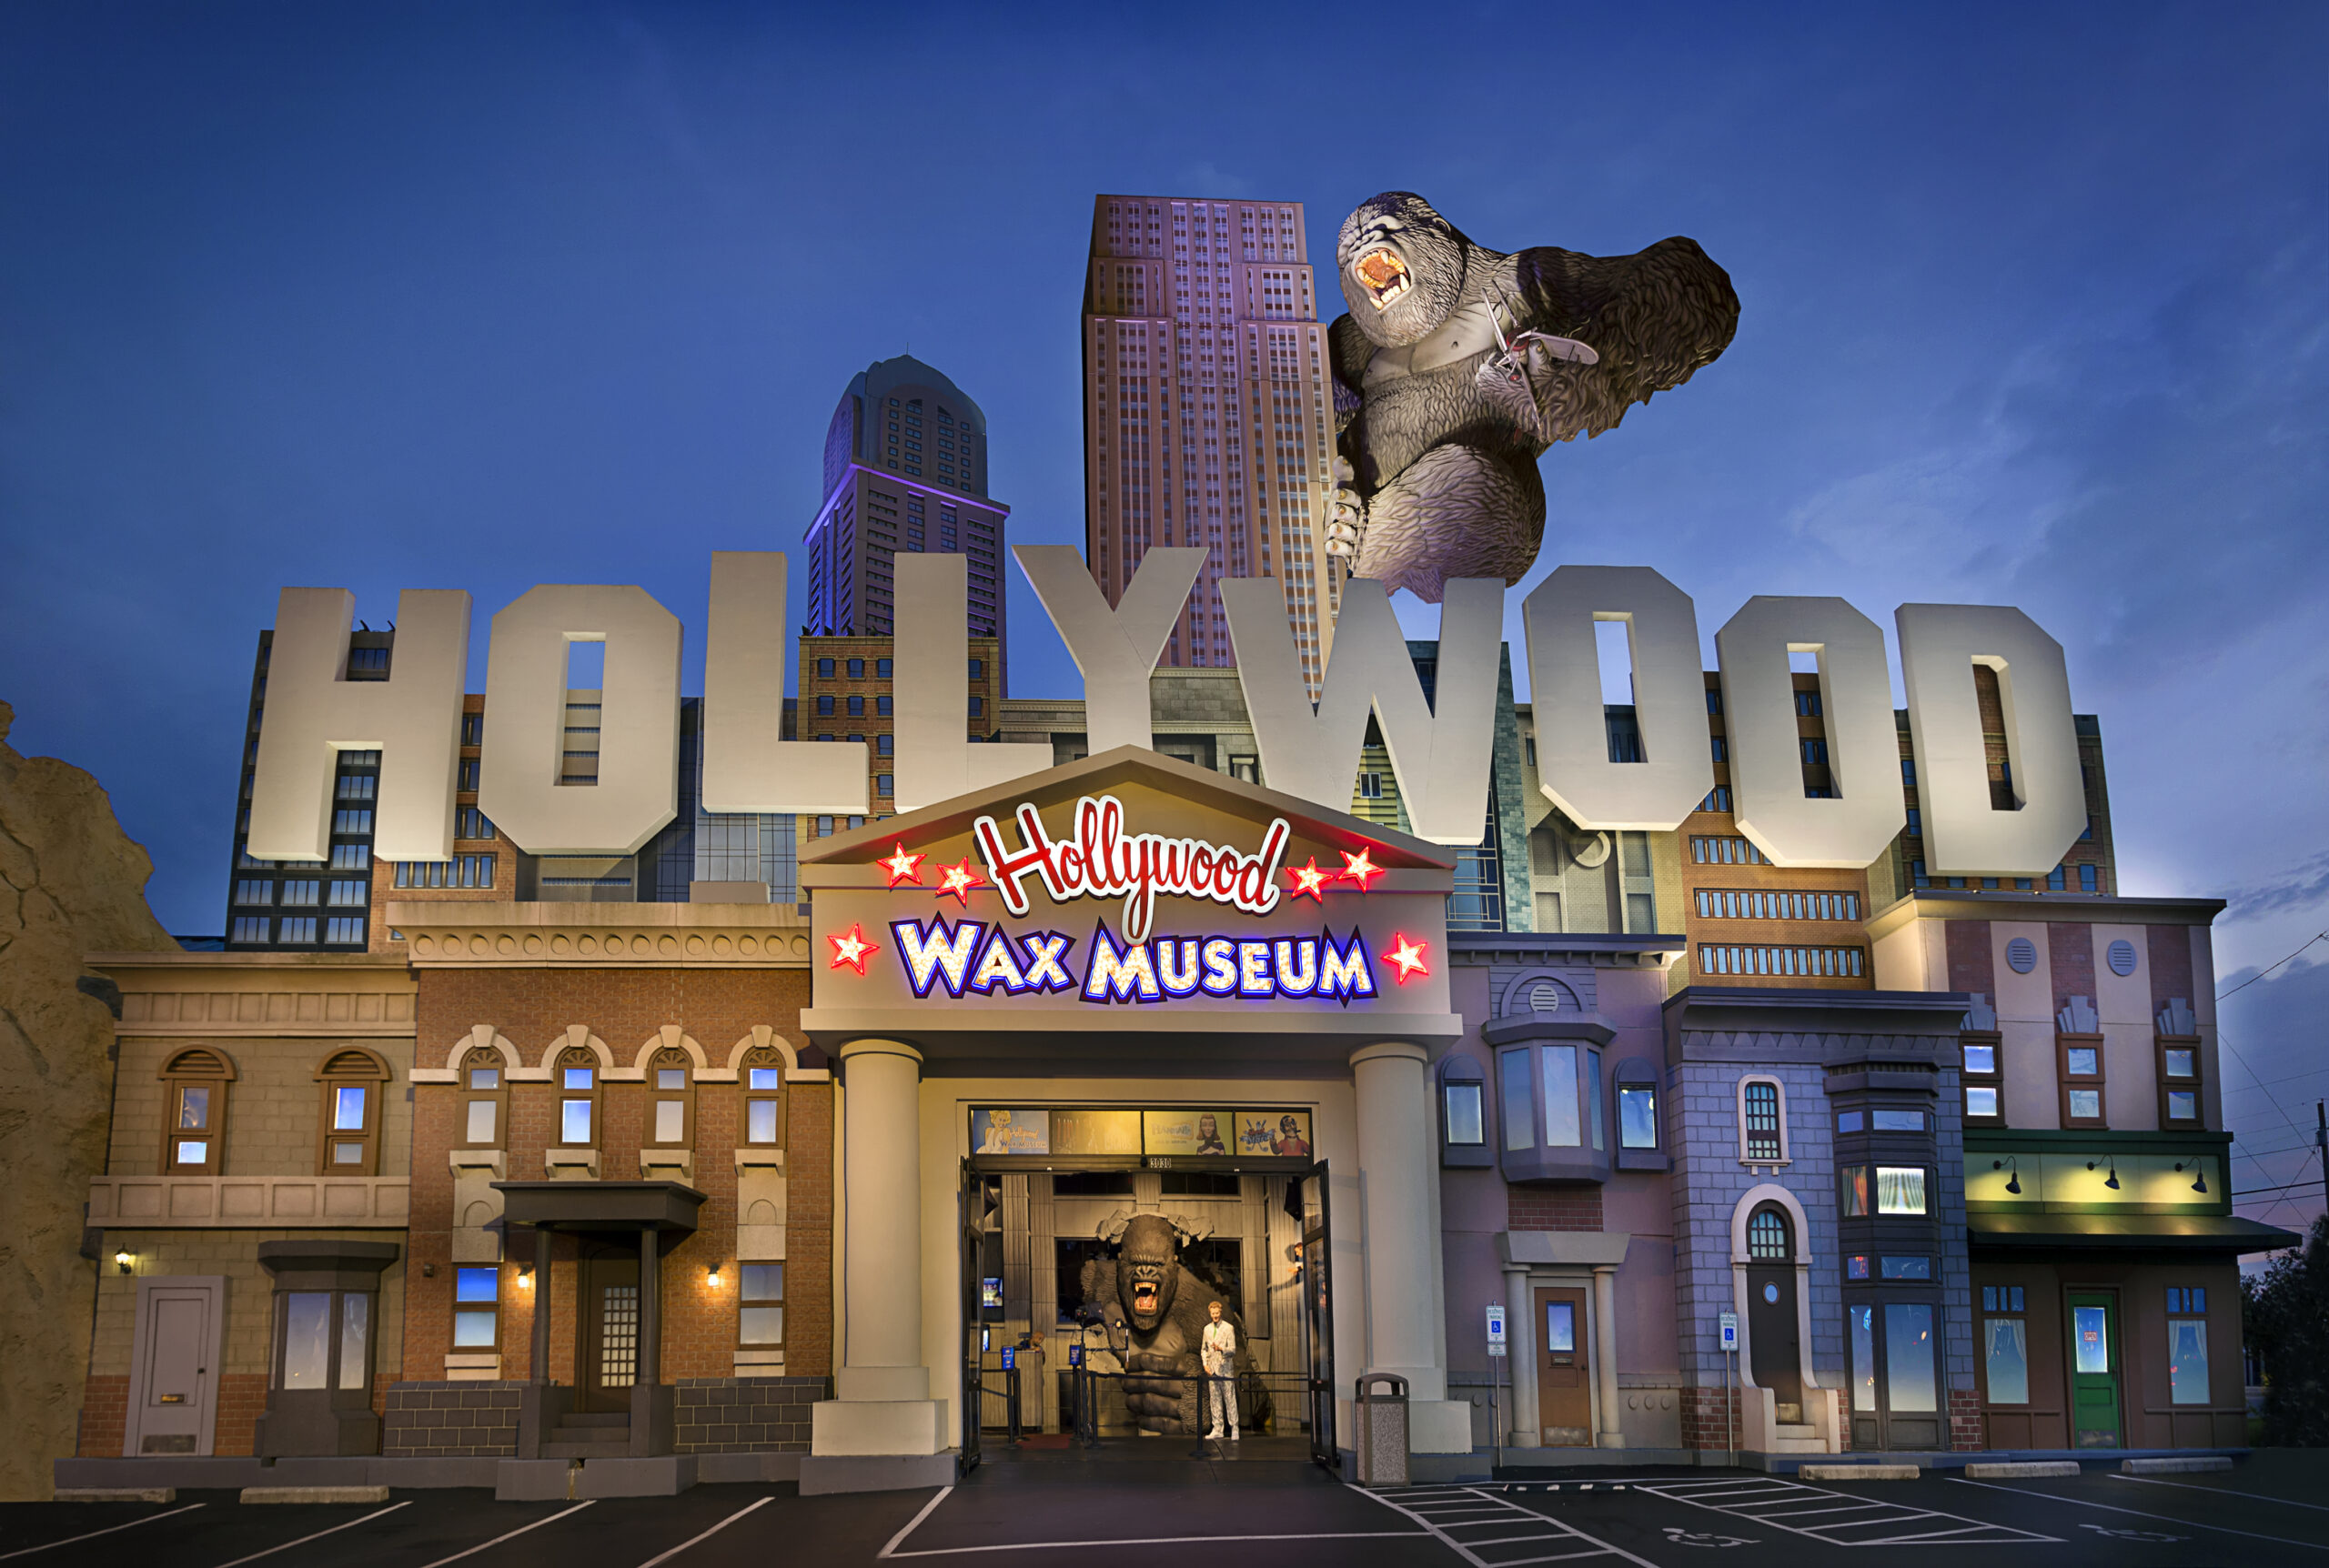 the hollywood wax museum is lit up at night